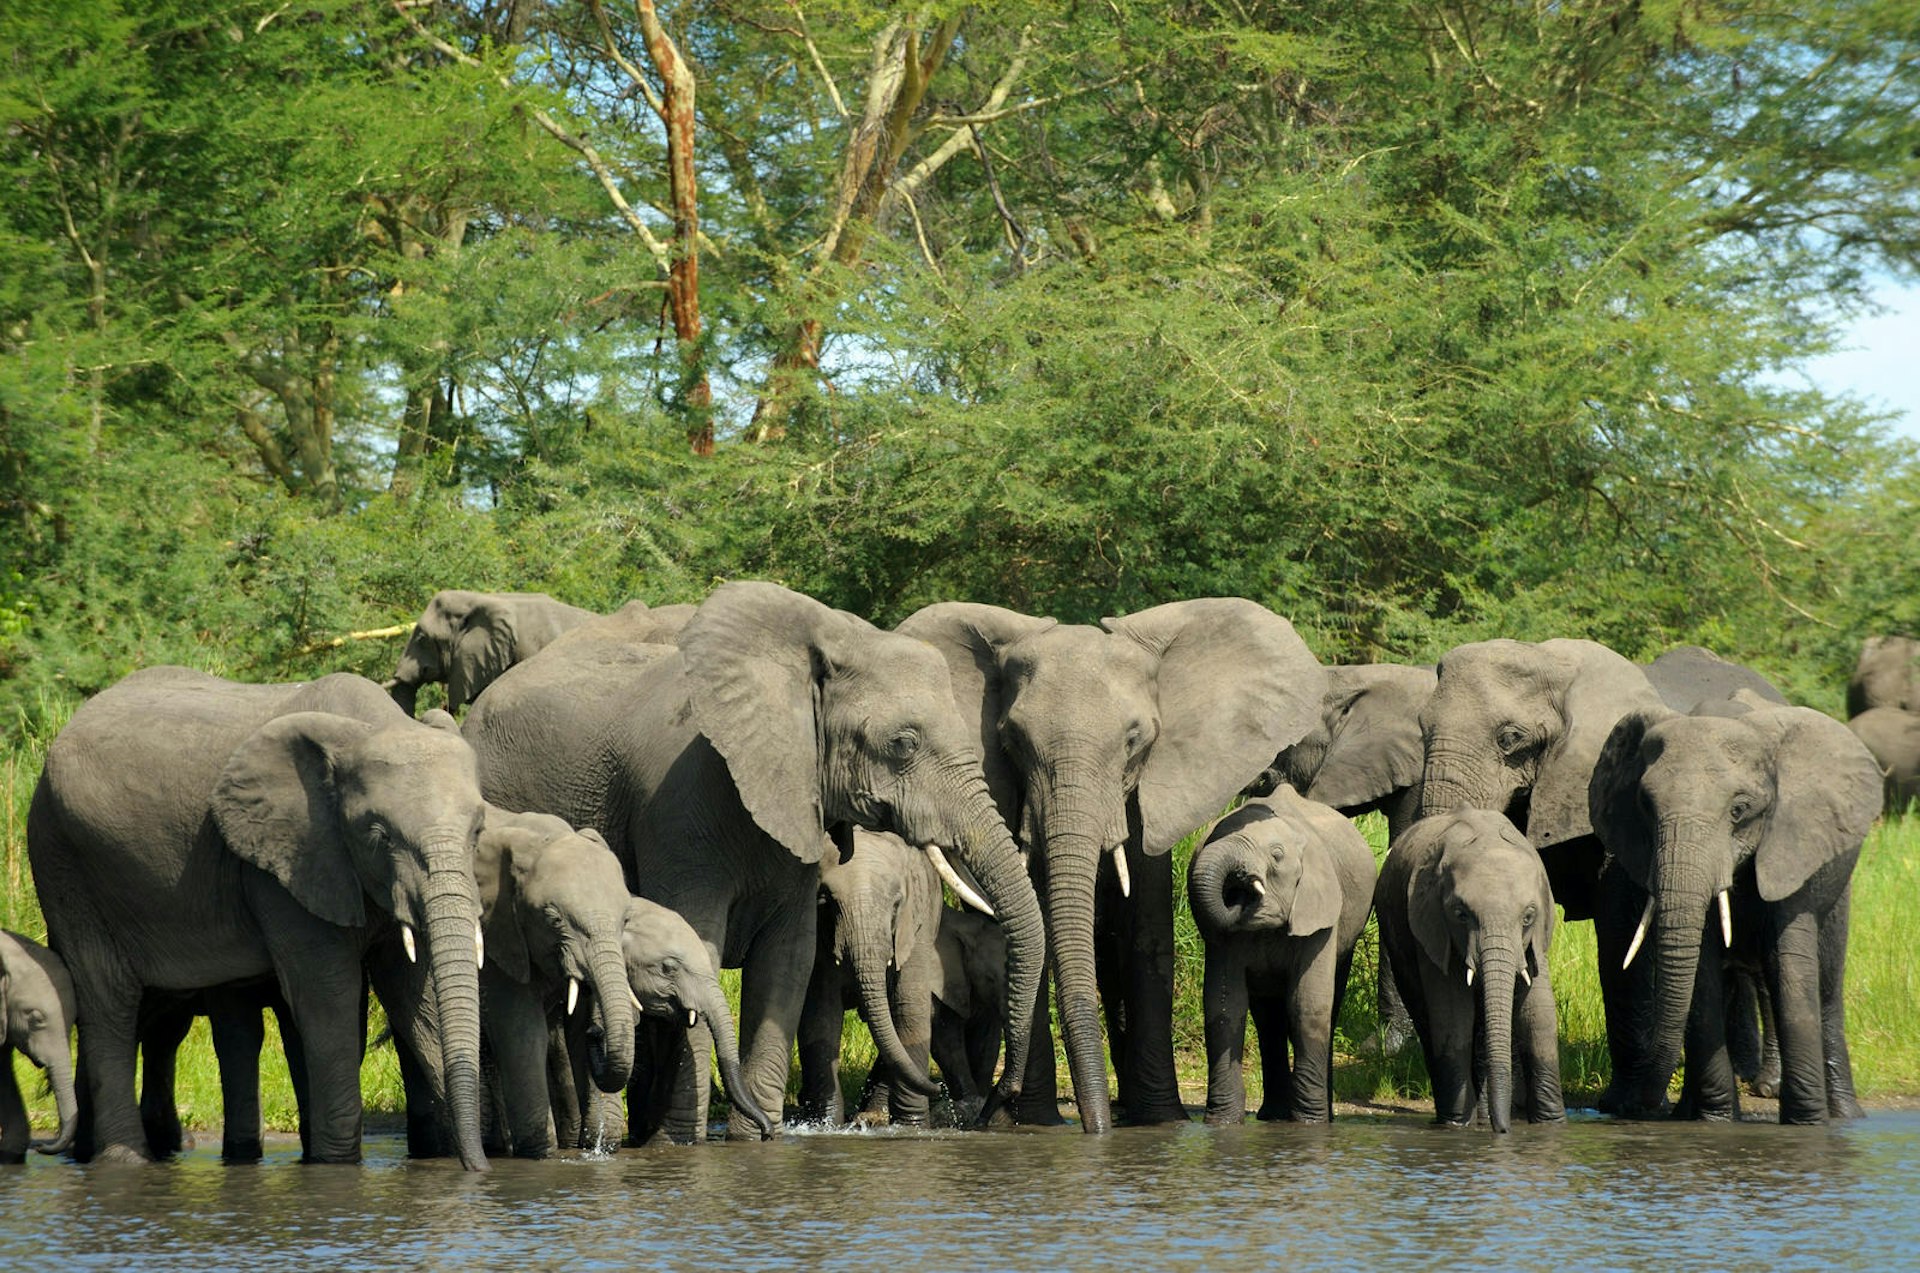 Elephant herd slating their thirst at the Shire River, Liwonde National Park © Christophe Cerisier / Getty Images